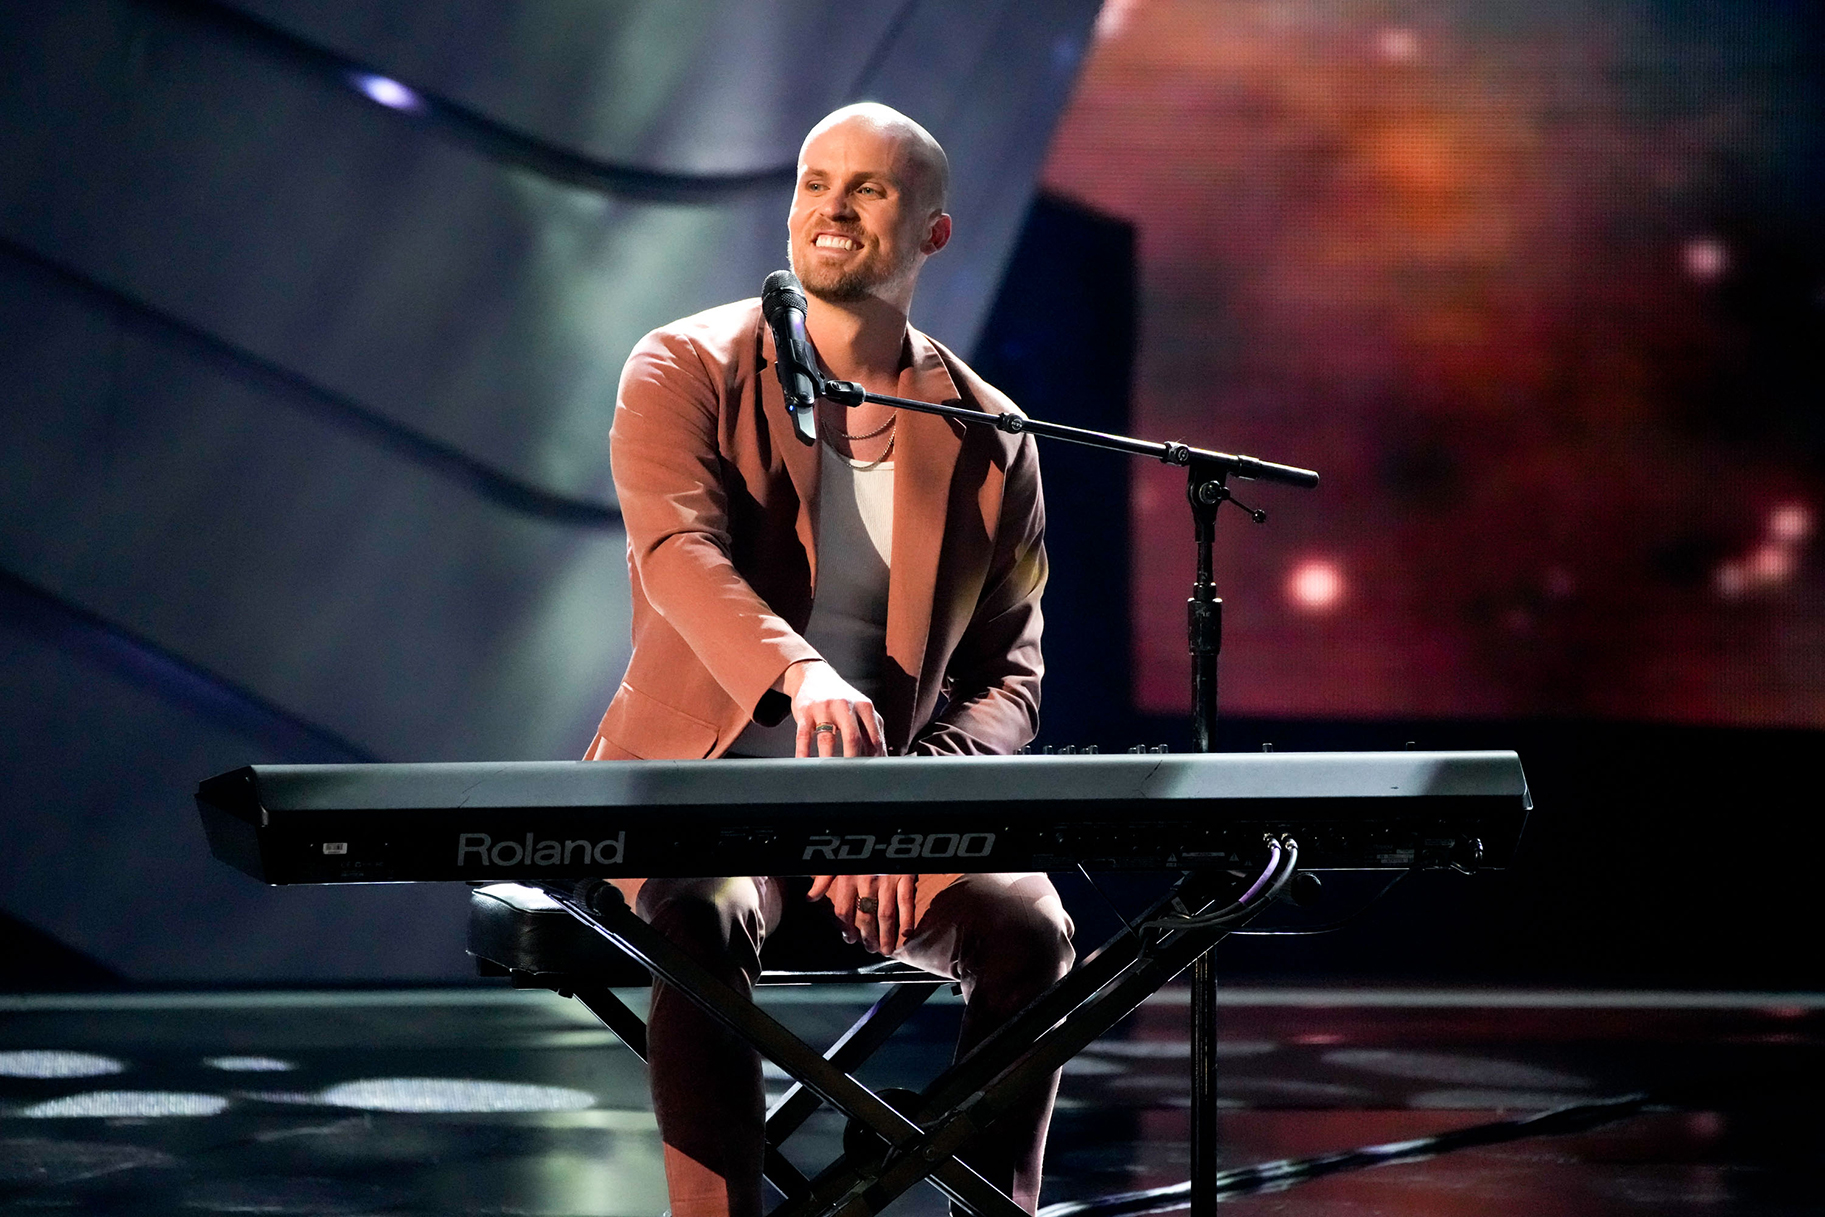 Ej Michels on The Voice Blind Auditions Part 3